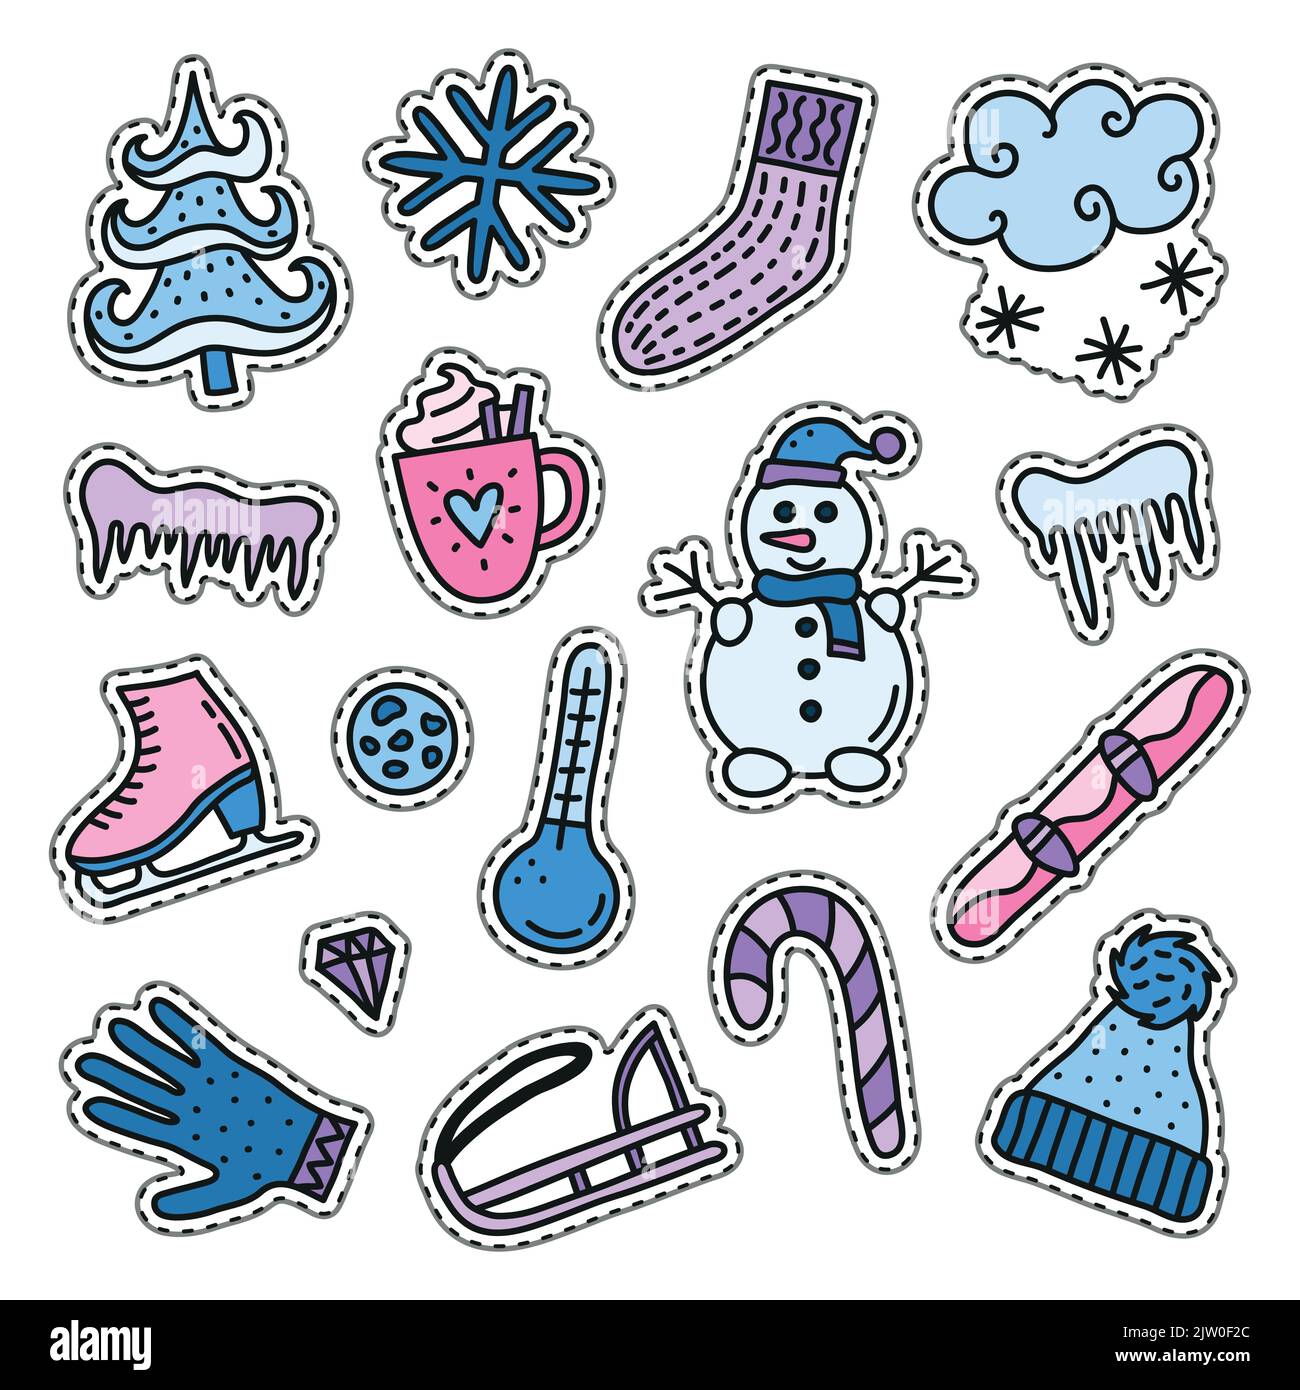 https://c8.alamy.com/comp/2JW0F2C/set-of-colorful-stickers-or-patches-with-winter-icons-isolated-on-white-background-2JW0F2C.jpg